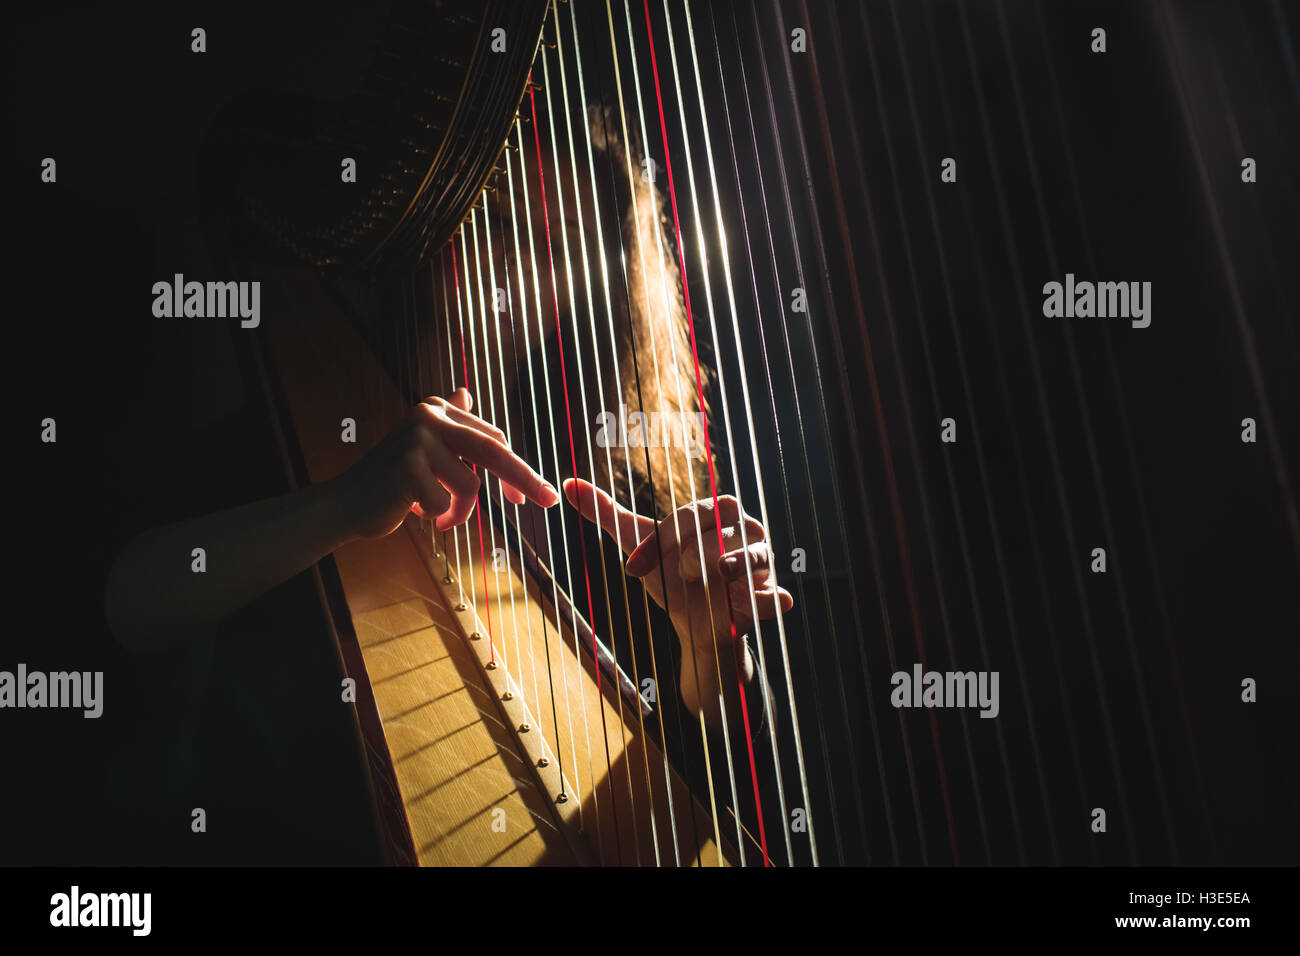 Woman playing a harp in music school Stock Photo